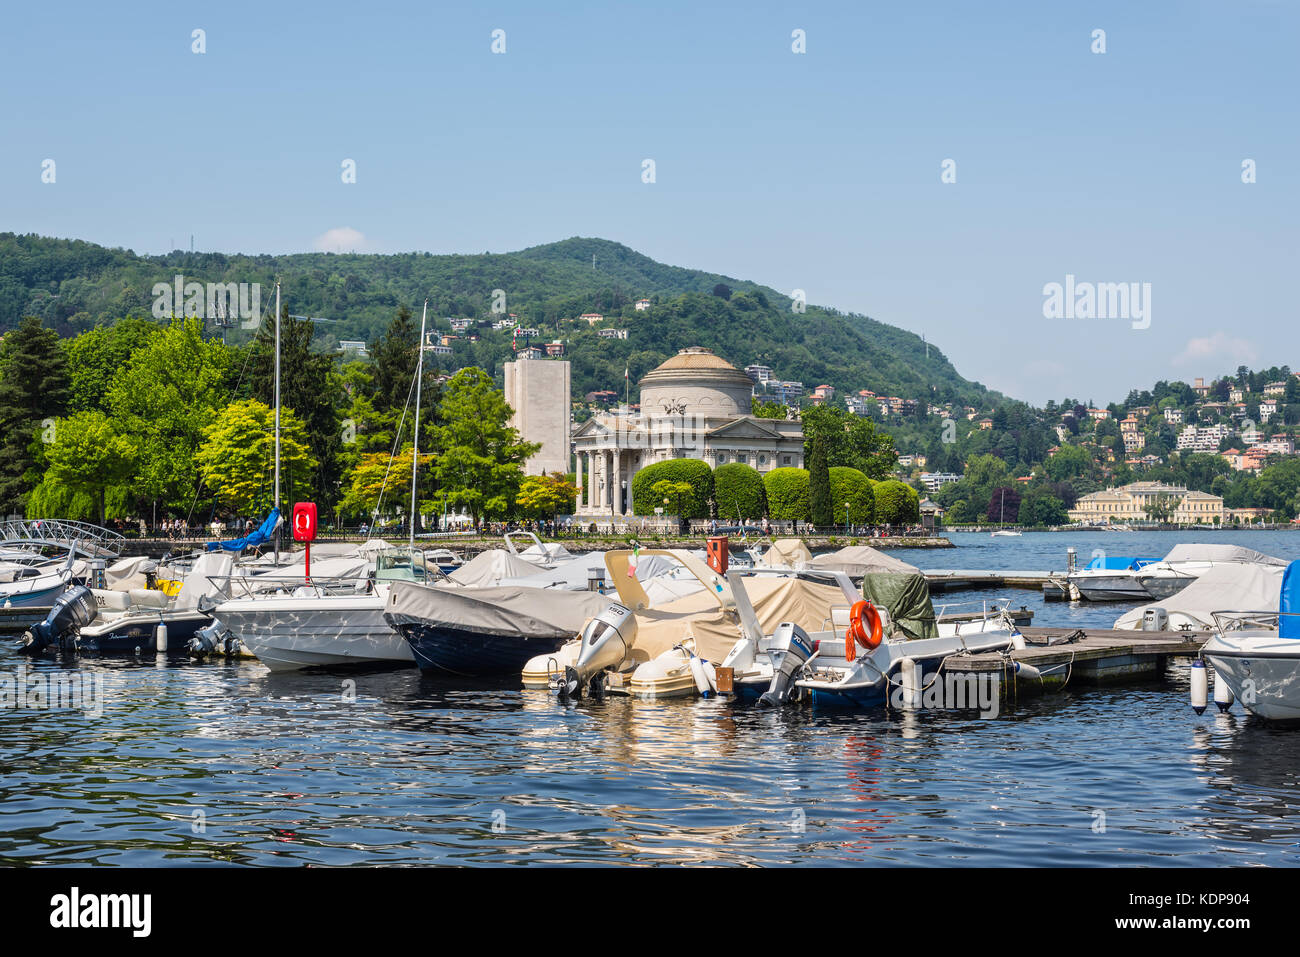 Como, Italy - May 27, 2016: Yachts and houses along Lake Como in Como town Lombardy region of Italy Europe. Volta Temple (Tempio Voltiano) in the cent Stock Photo